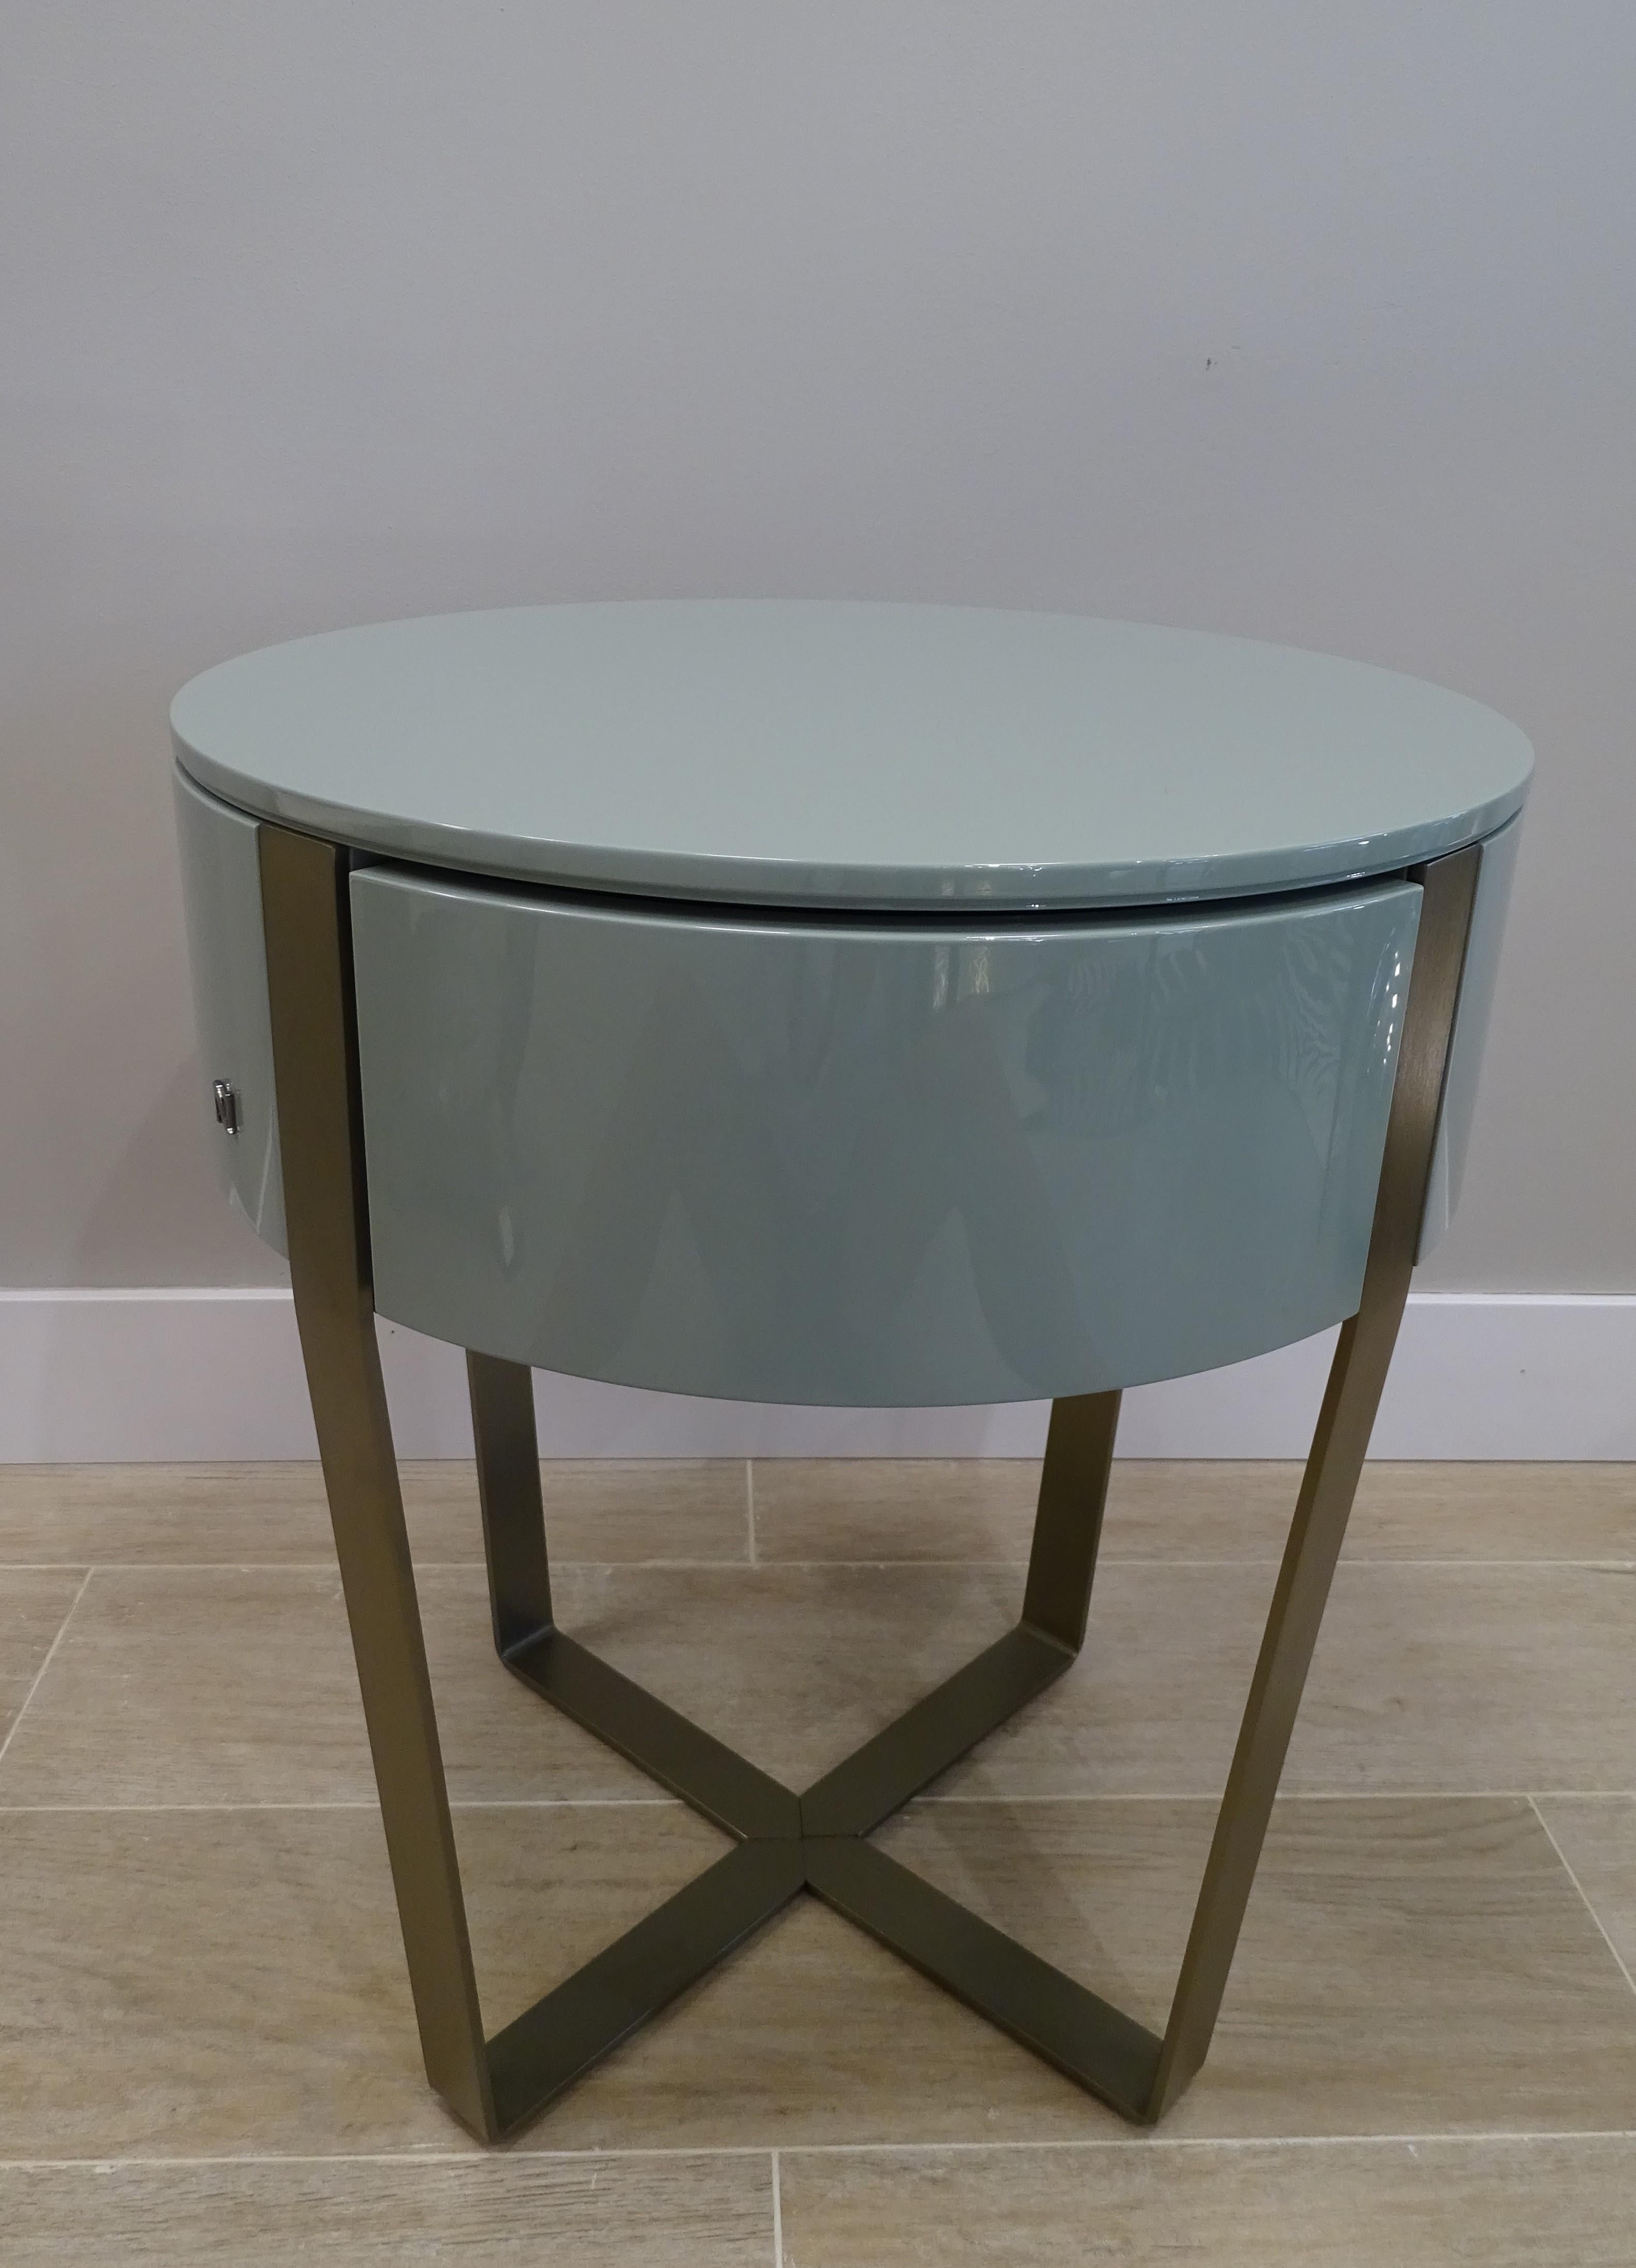 Amazing sidetable 
 Venere model bedside table in celadon green or glossy jade. This model achieves the perfect balance between natural beauty and industrial modernity thanks to its curved design. Another of its attributes is the absence of a